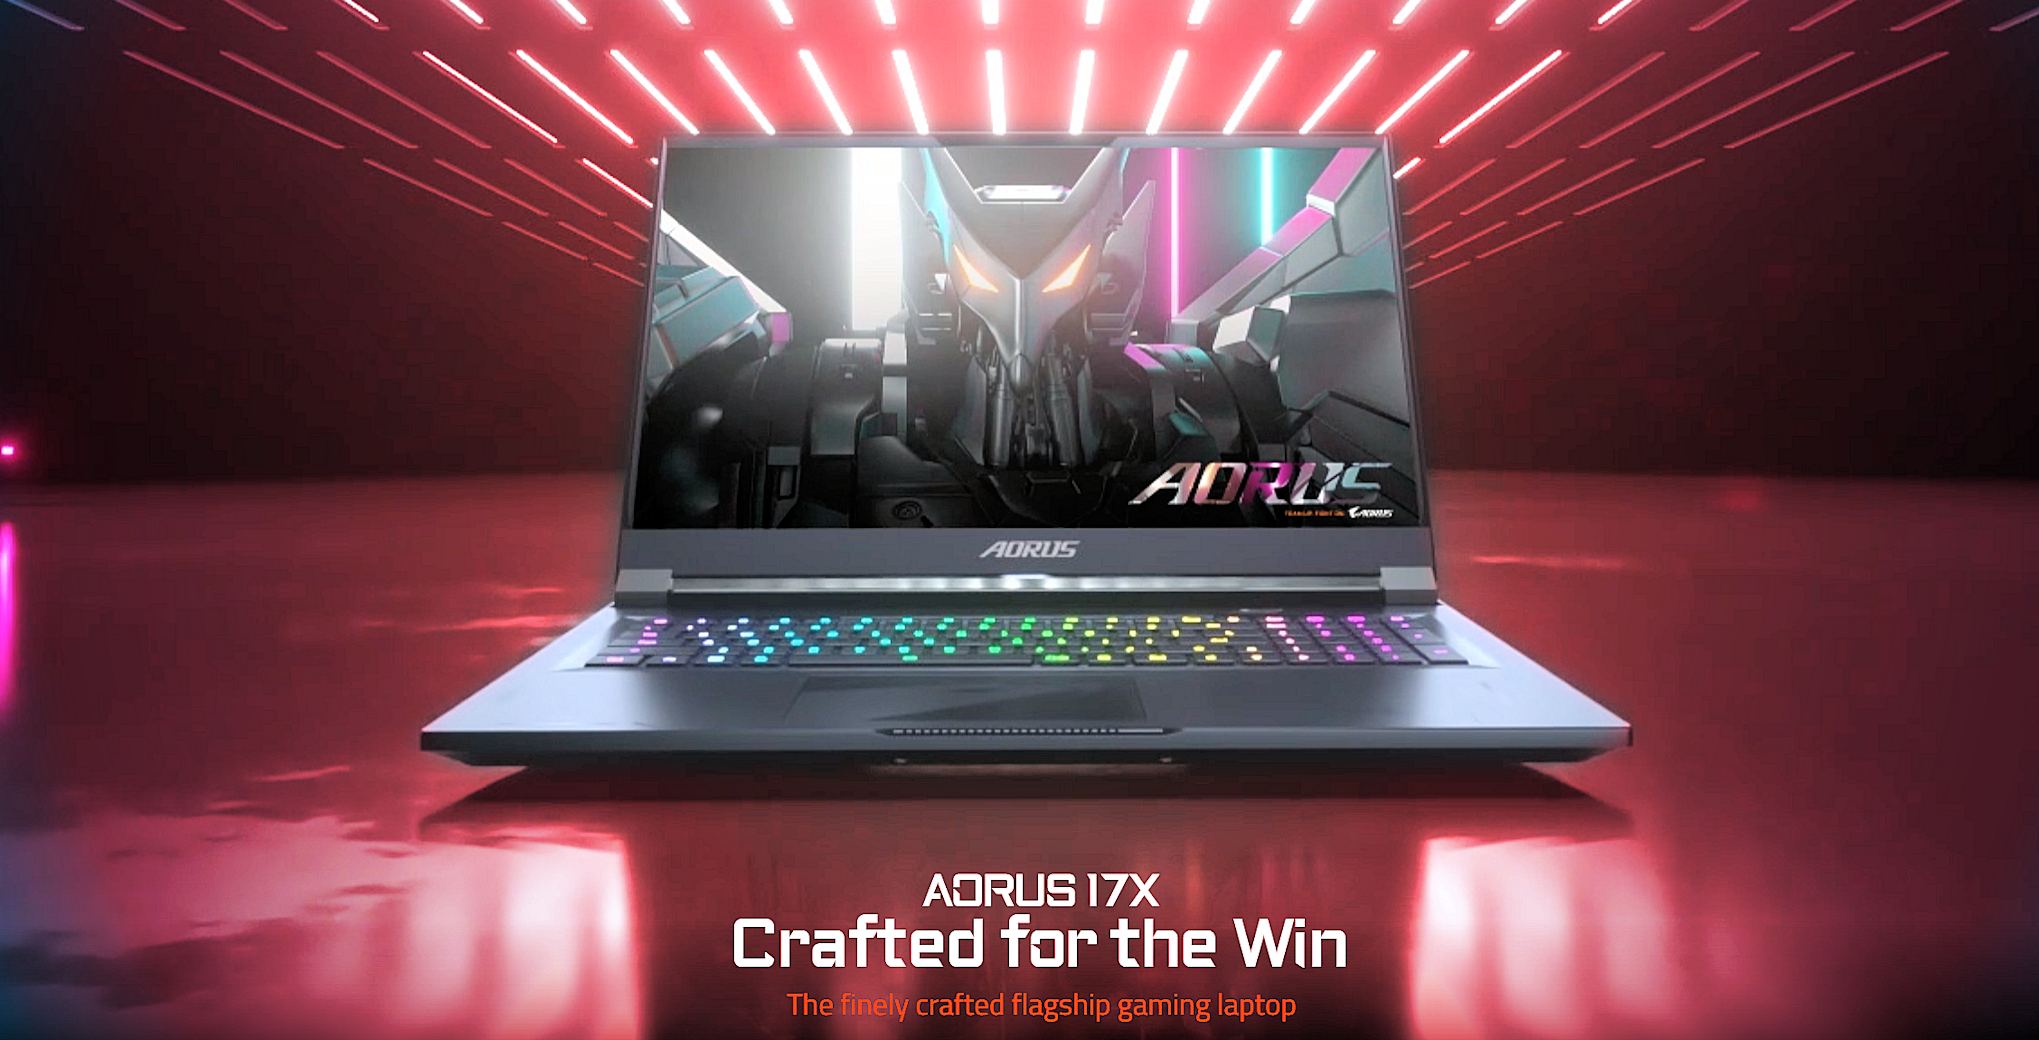 AORUS 17X, the first gaming laptop with GeForce RTX 4090 GPU is now available for preorder